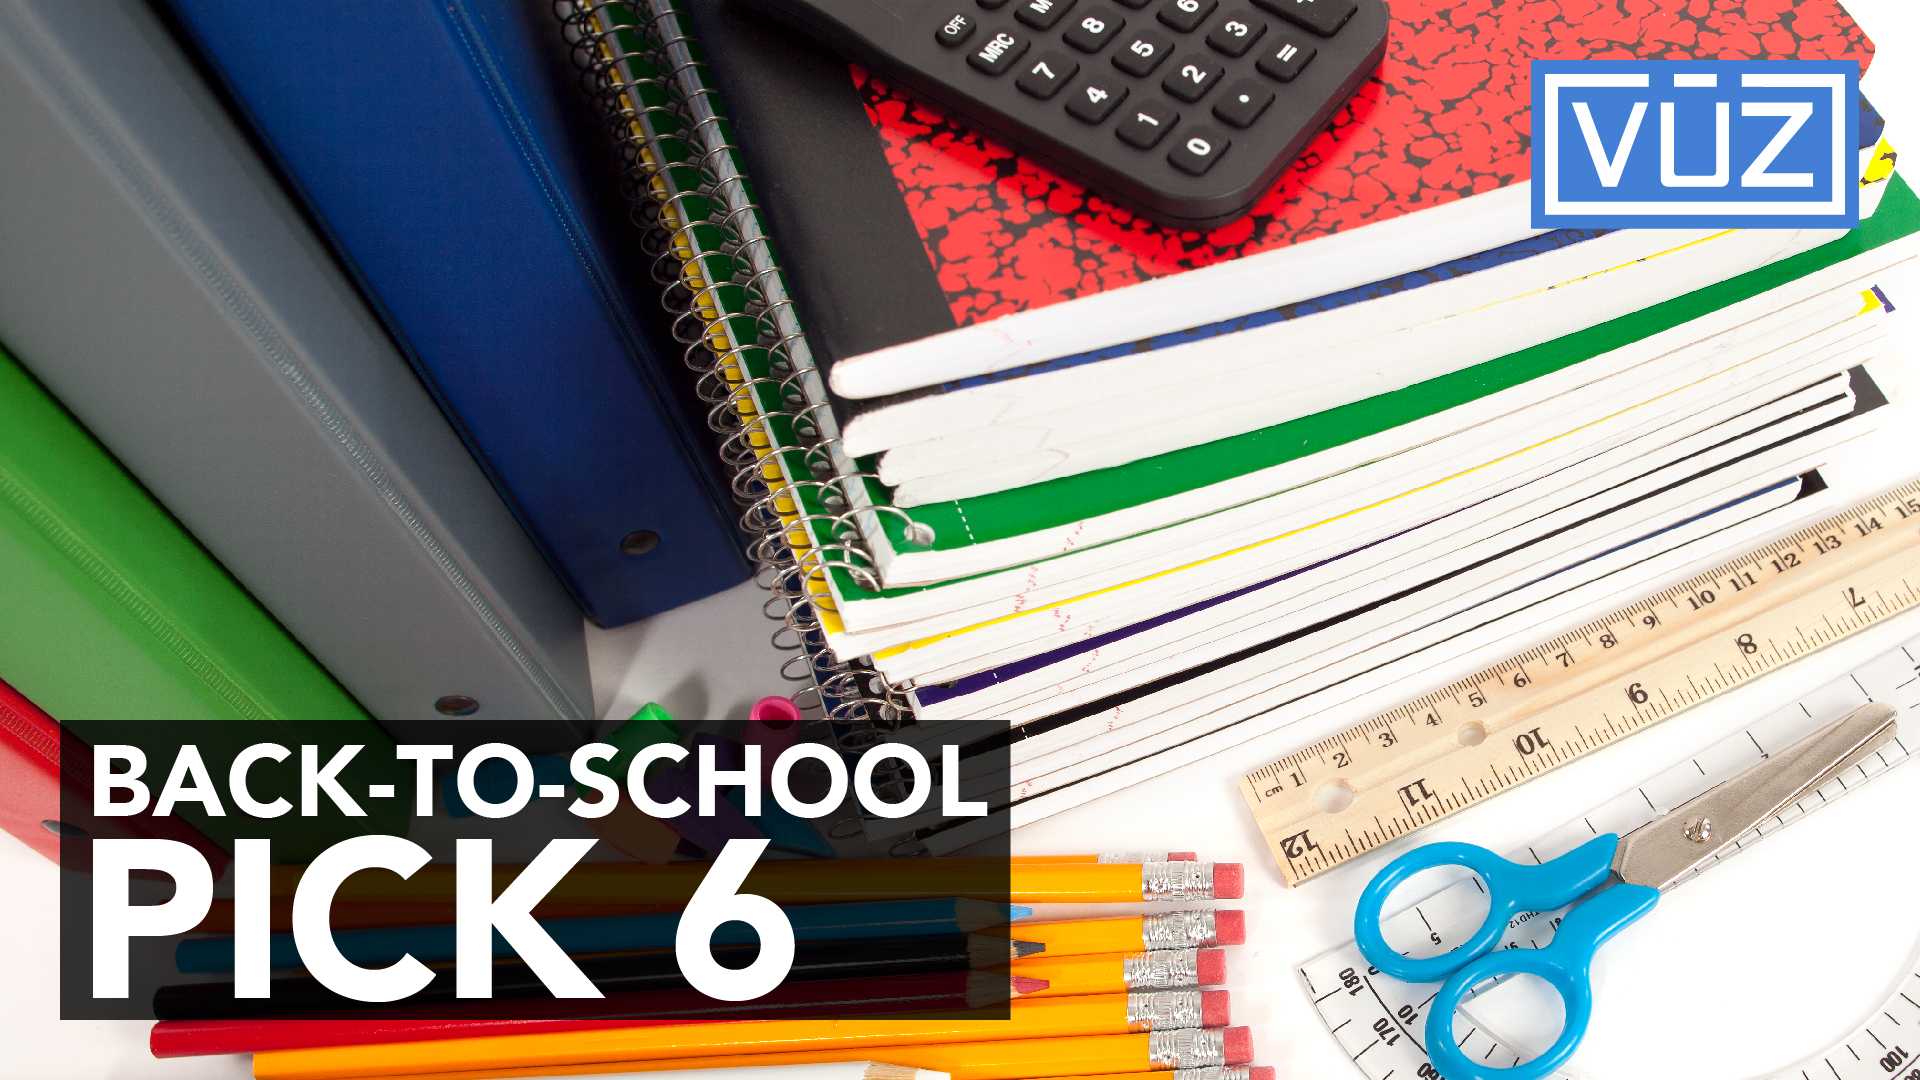 Six great back-to-school supplies ideas